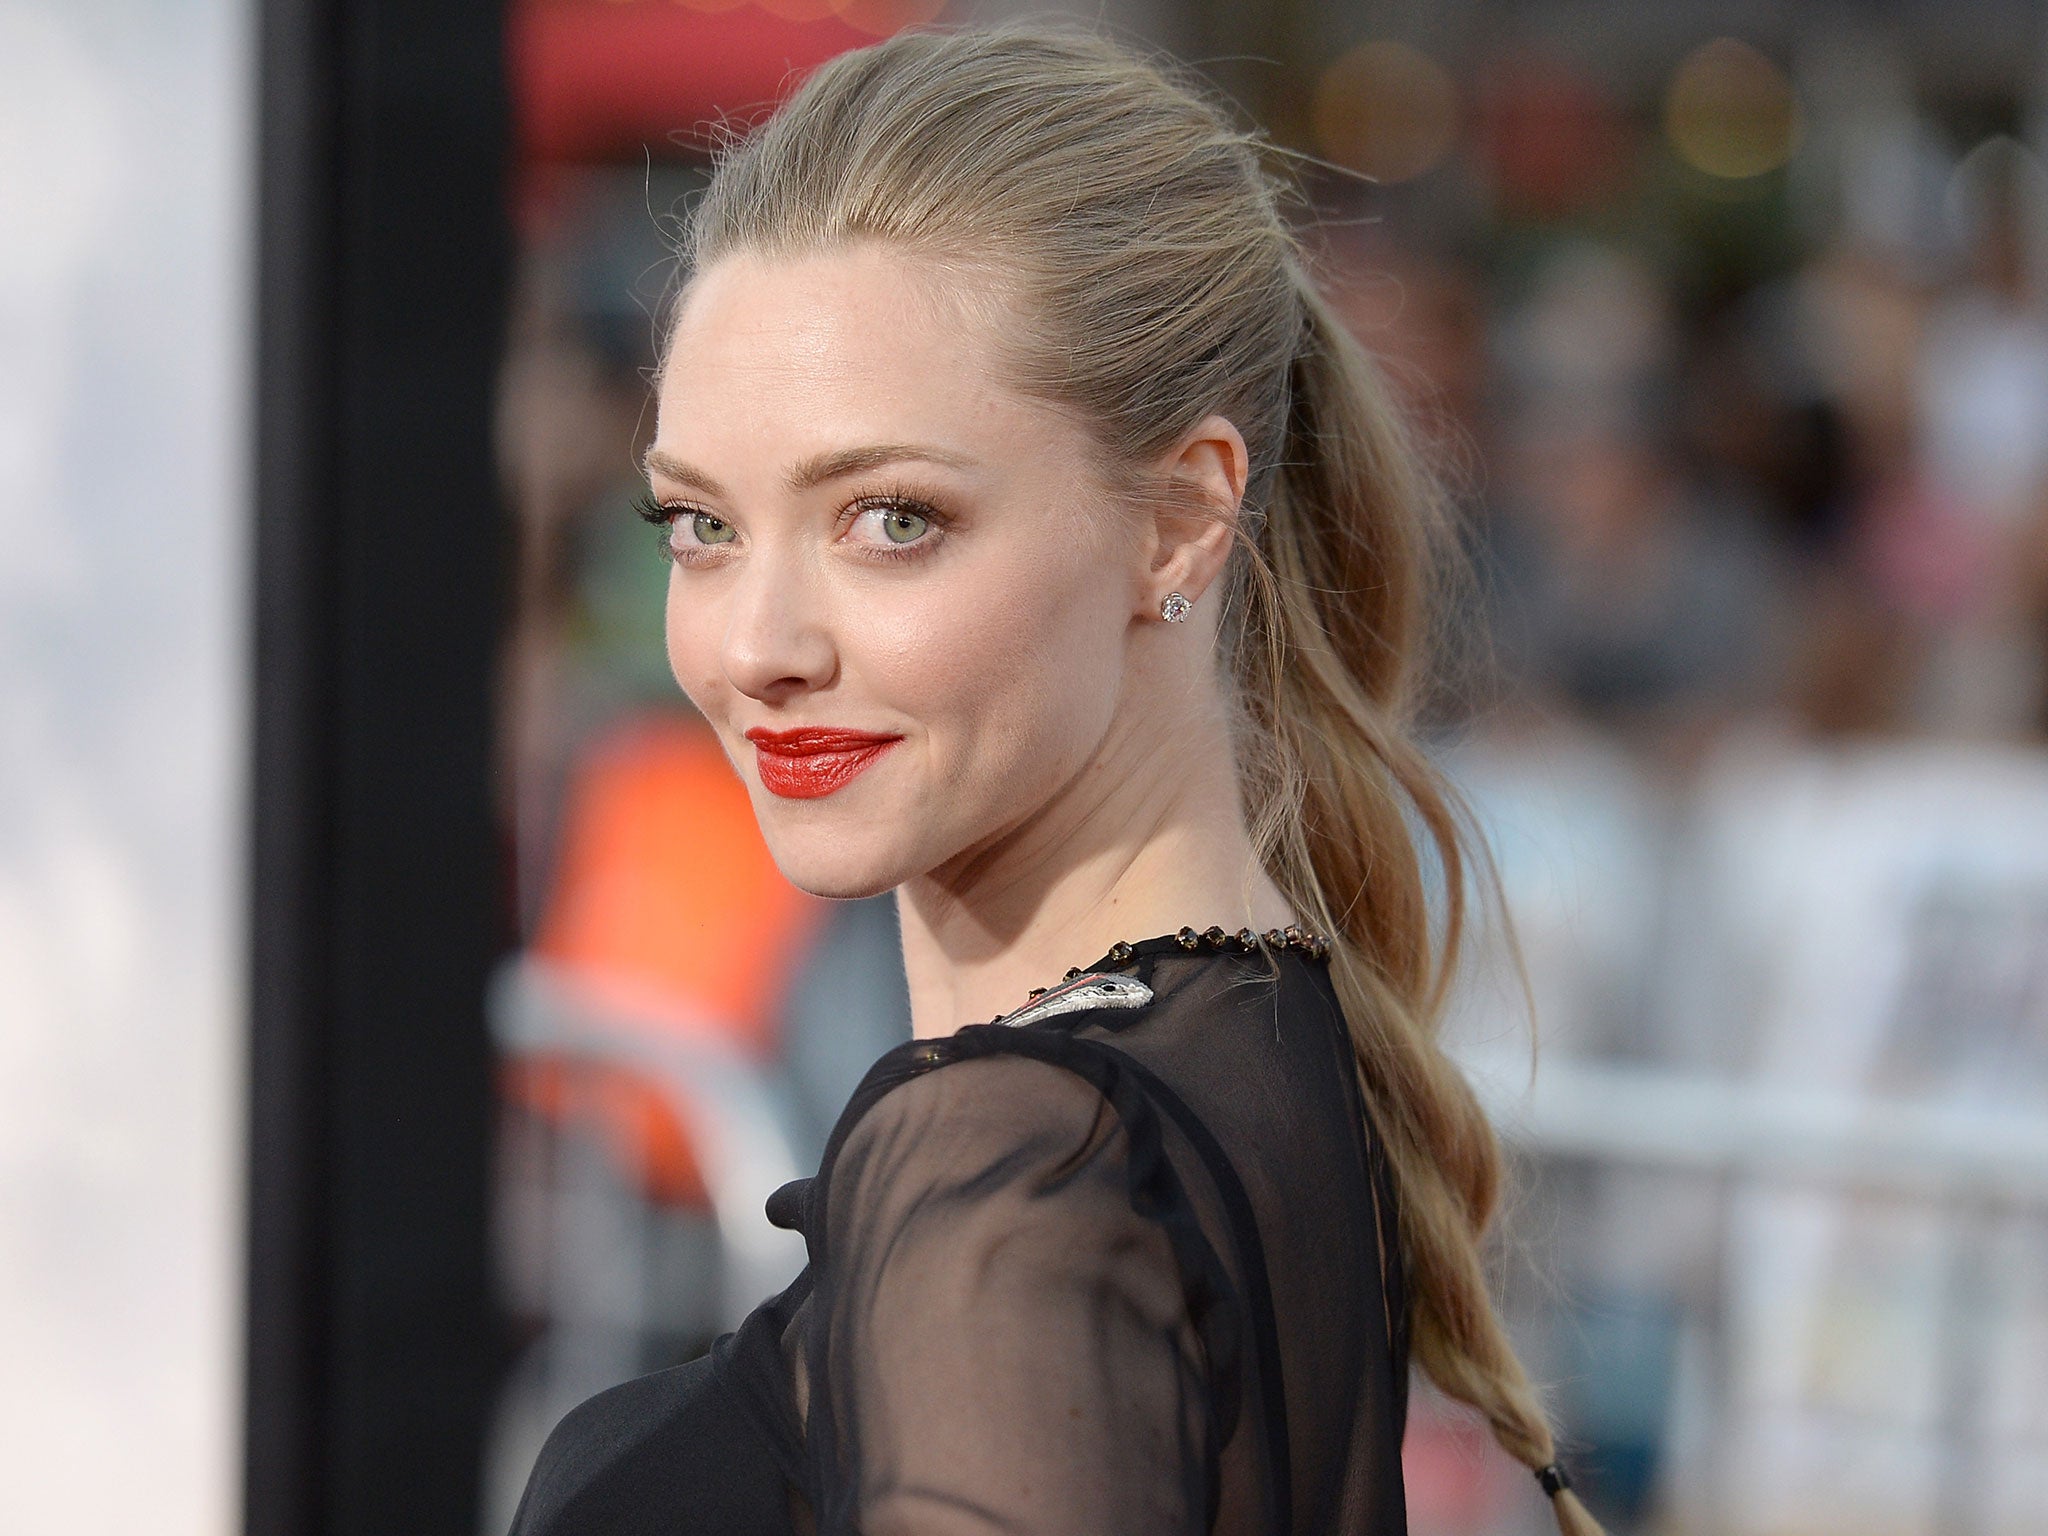 Amanda Seyfried believes every actress should fight for equal pay rights